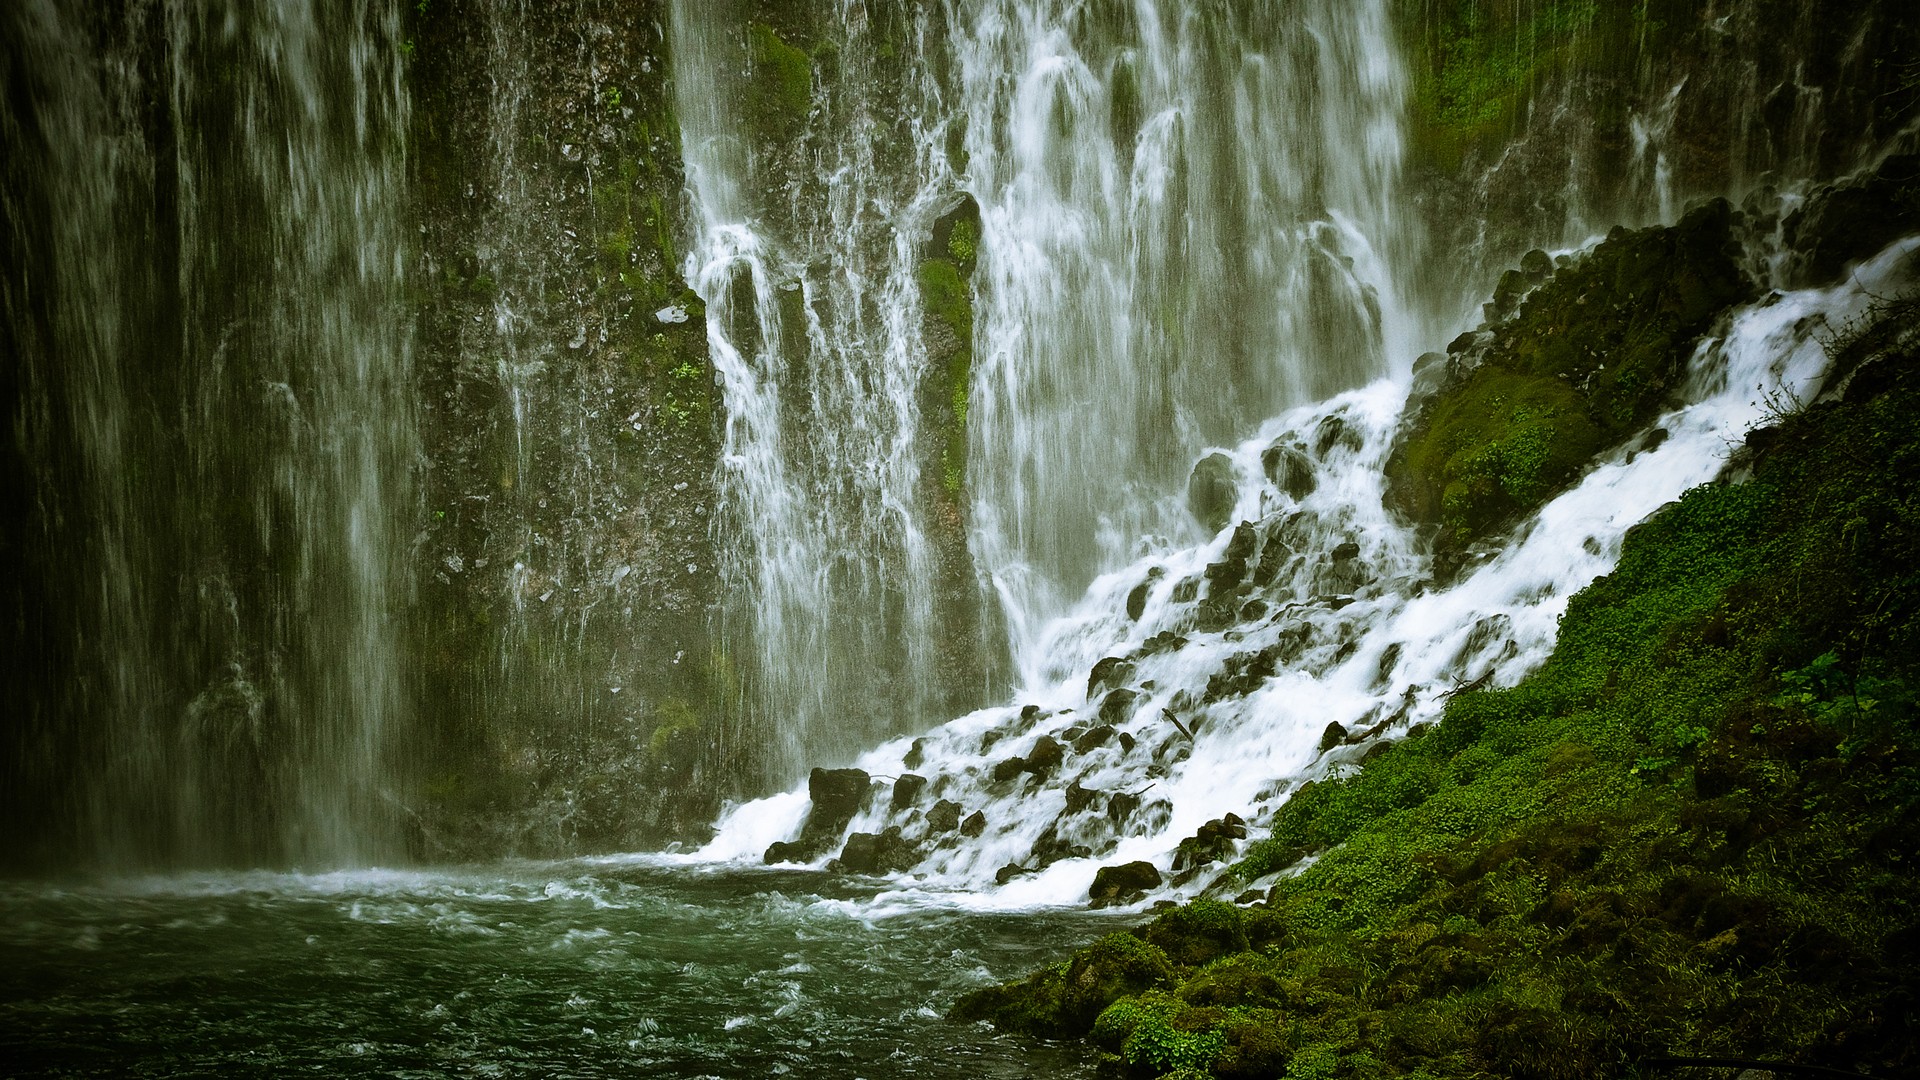 General 1920x1080 waterfall nature landscape